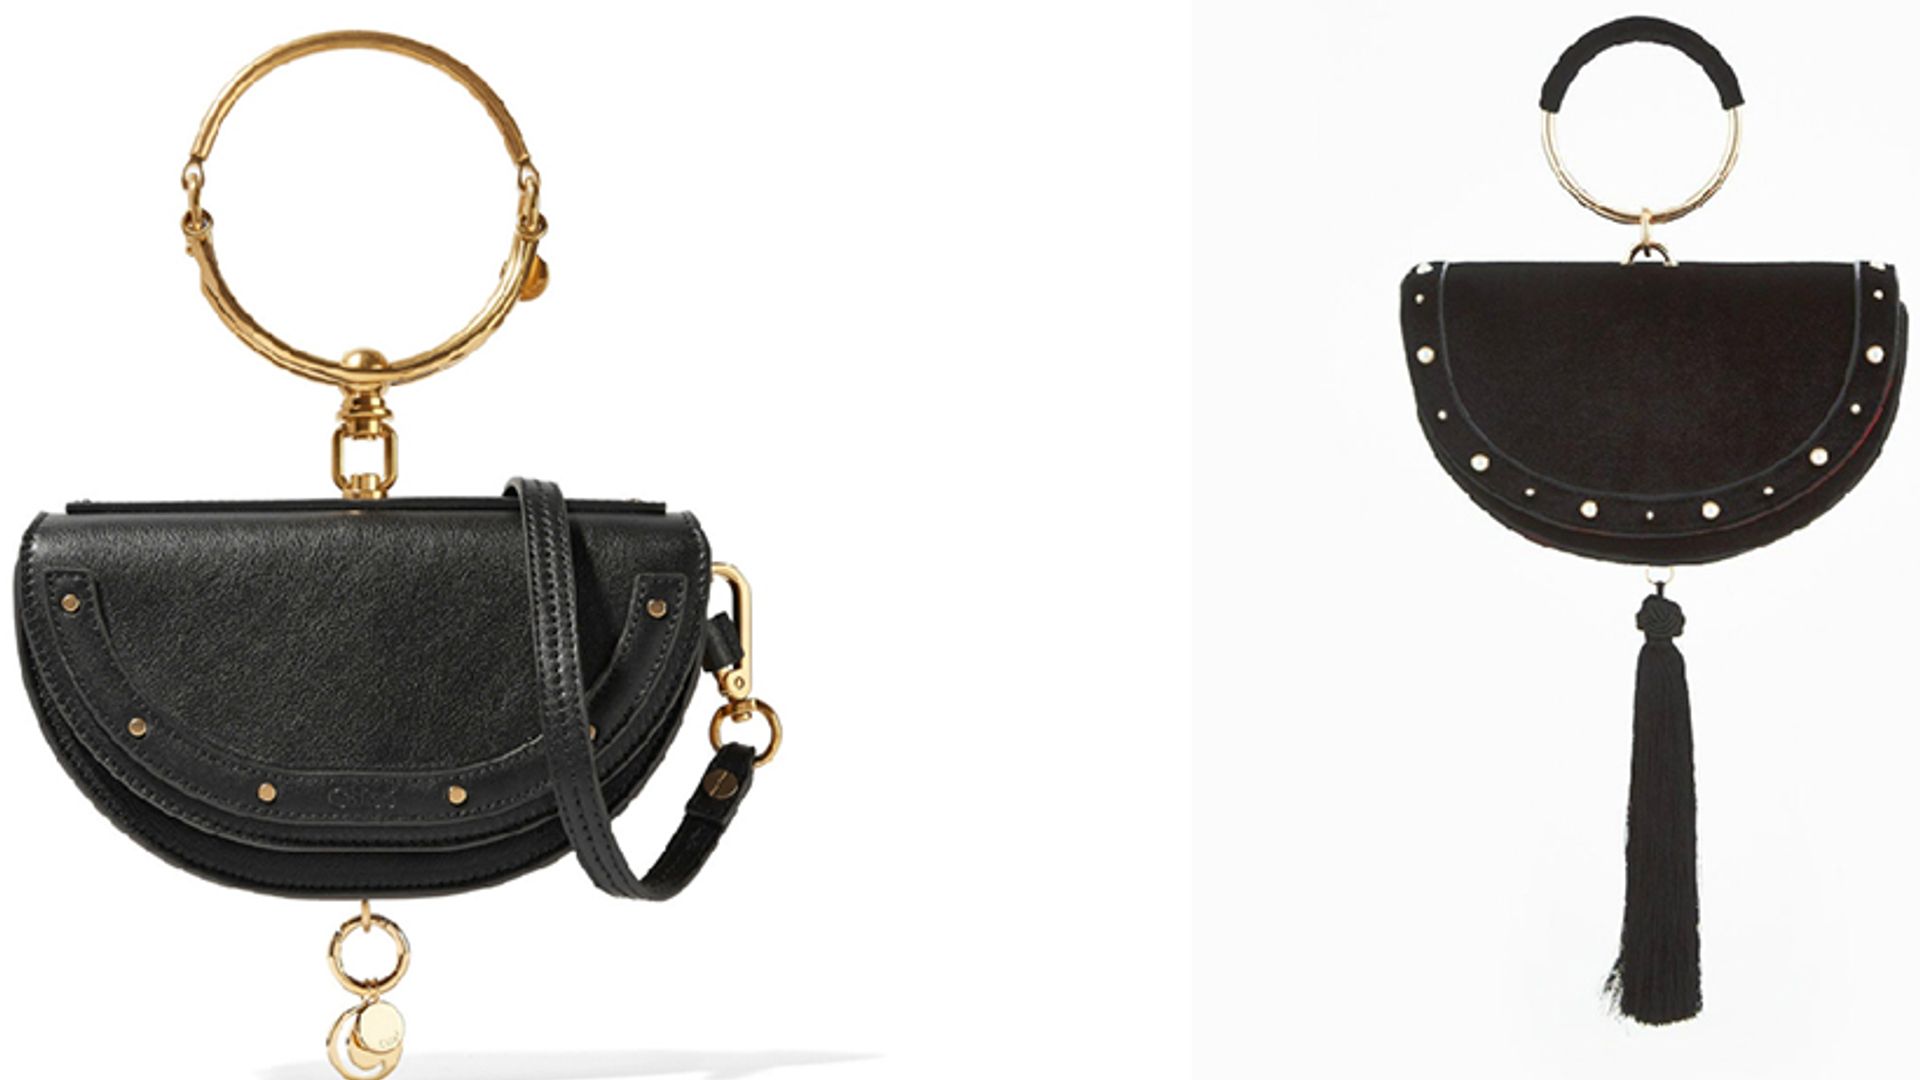 The Most Popular Chloe Handbags & Dupes For Less